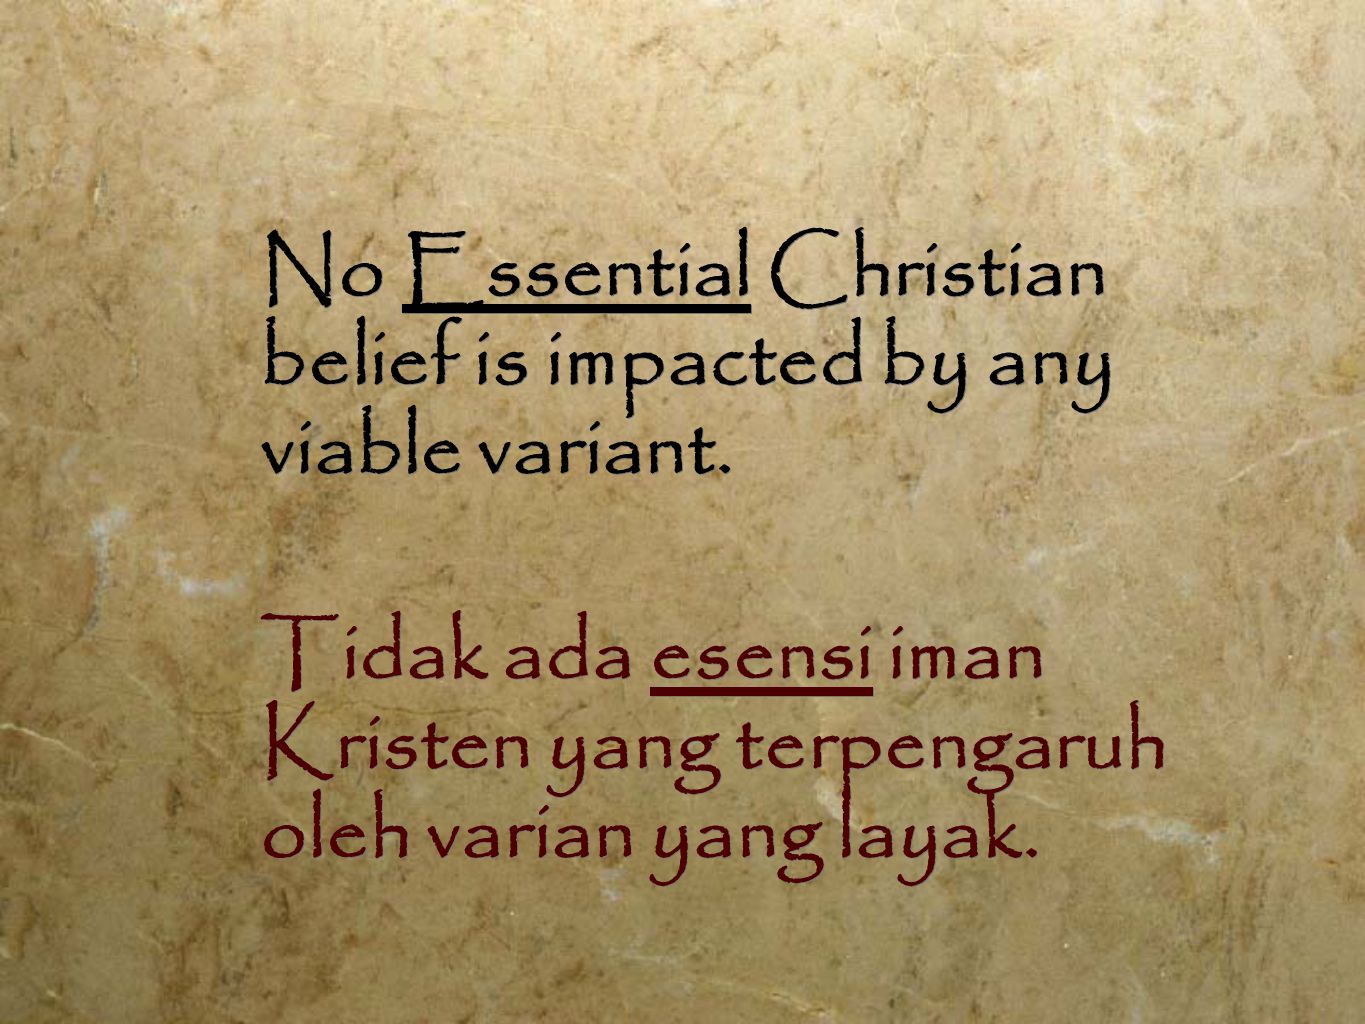 No Essential Christian belief is impacted by any viable variant.